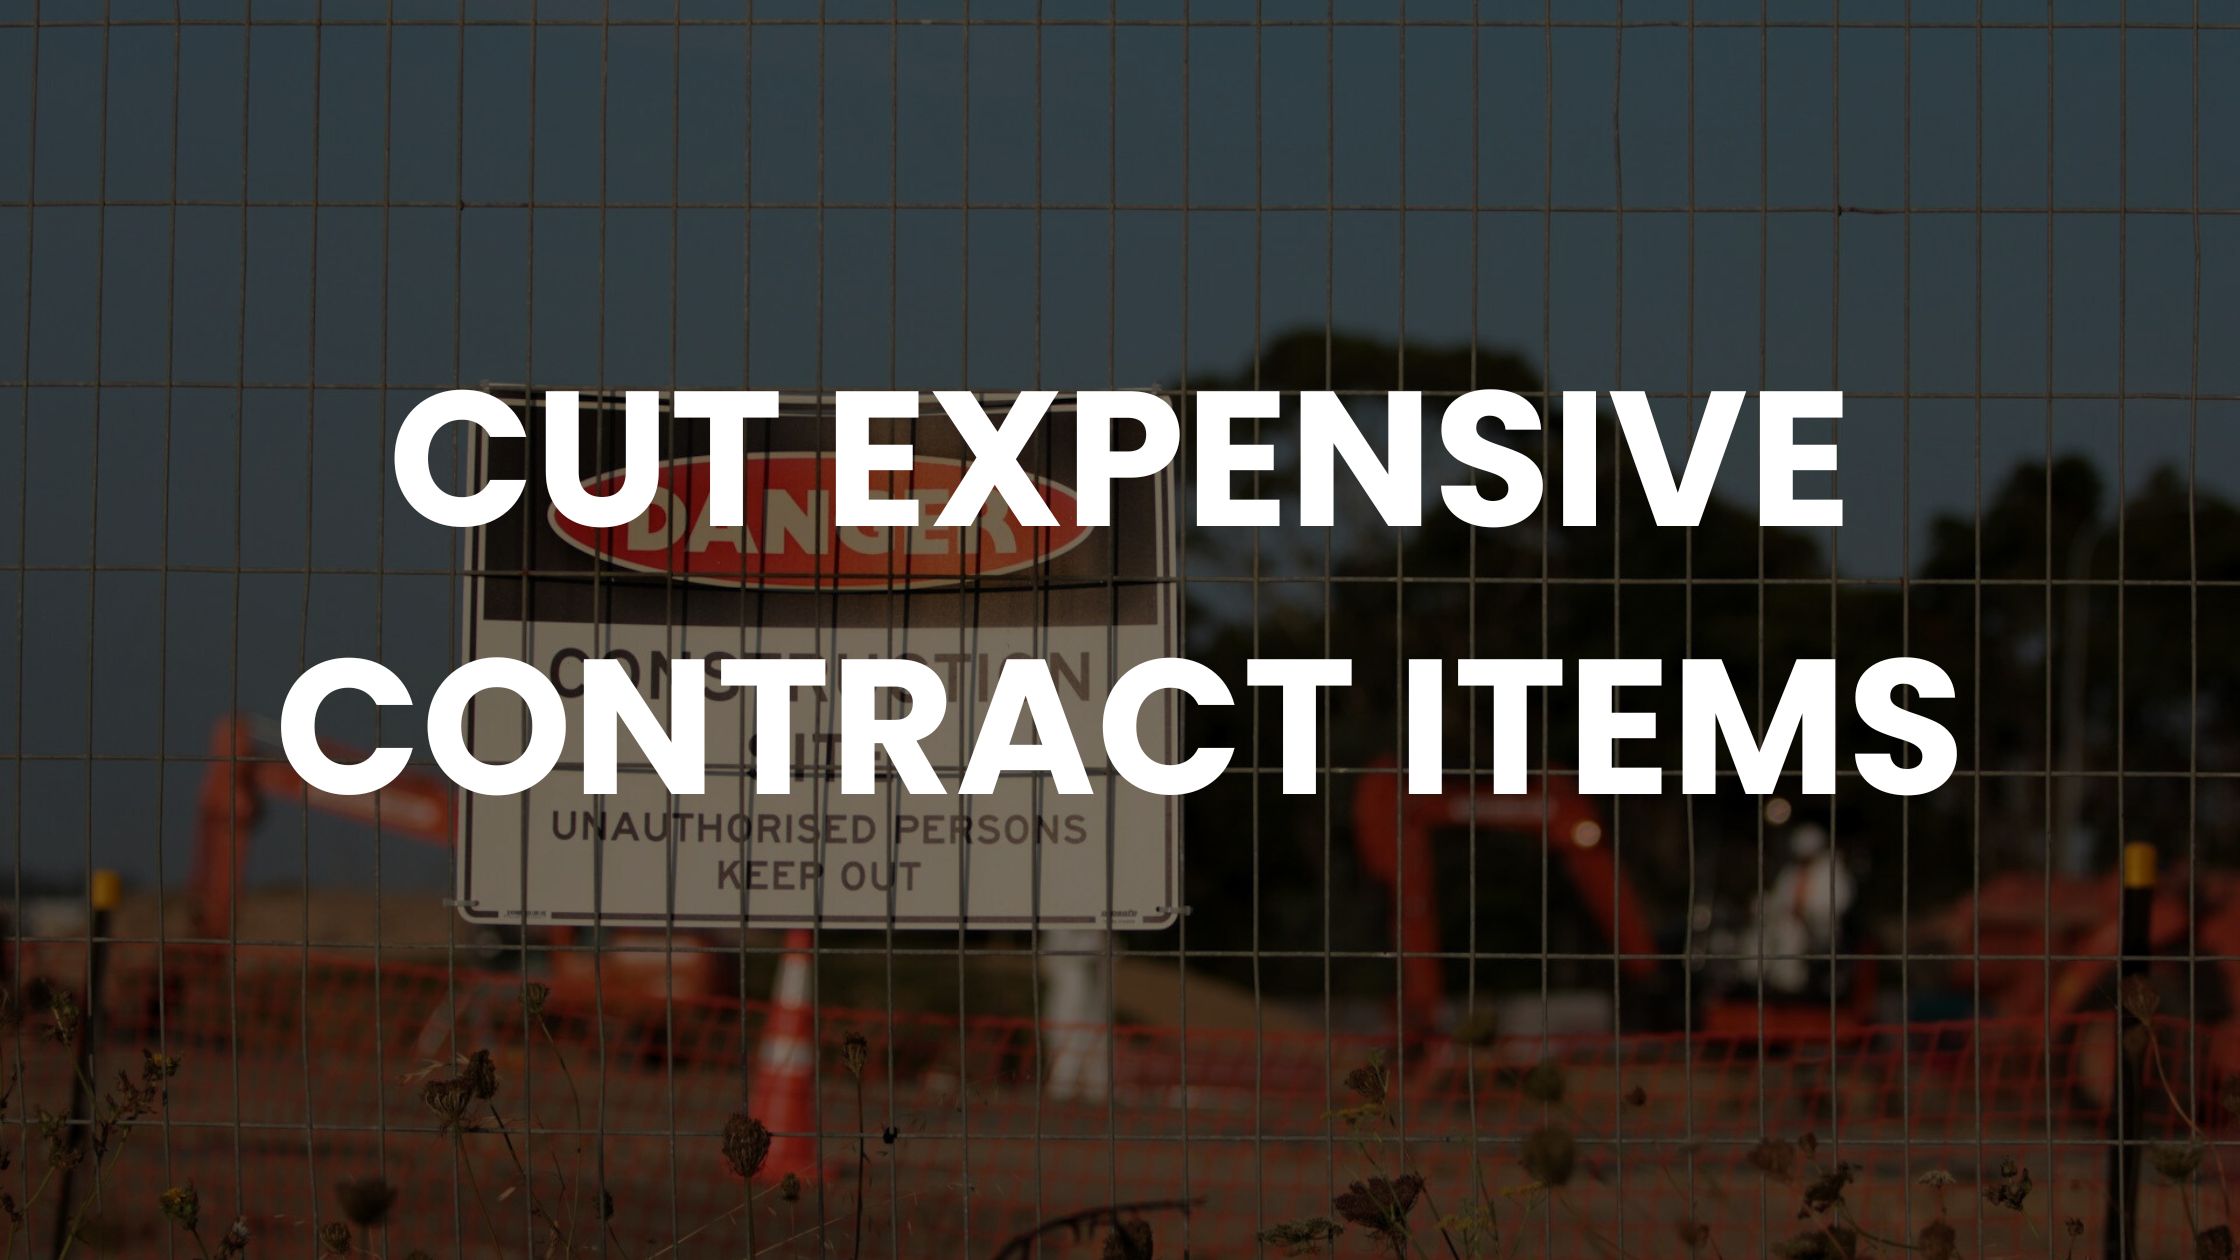 Construction site seen through safety fencing and ‘CUT EXPENSIVE CONTRACT ITEMS’ text overlay